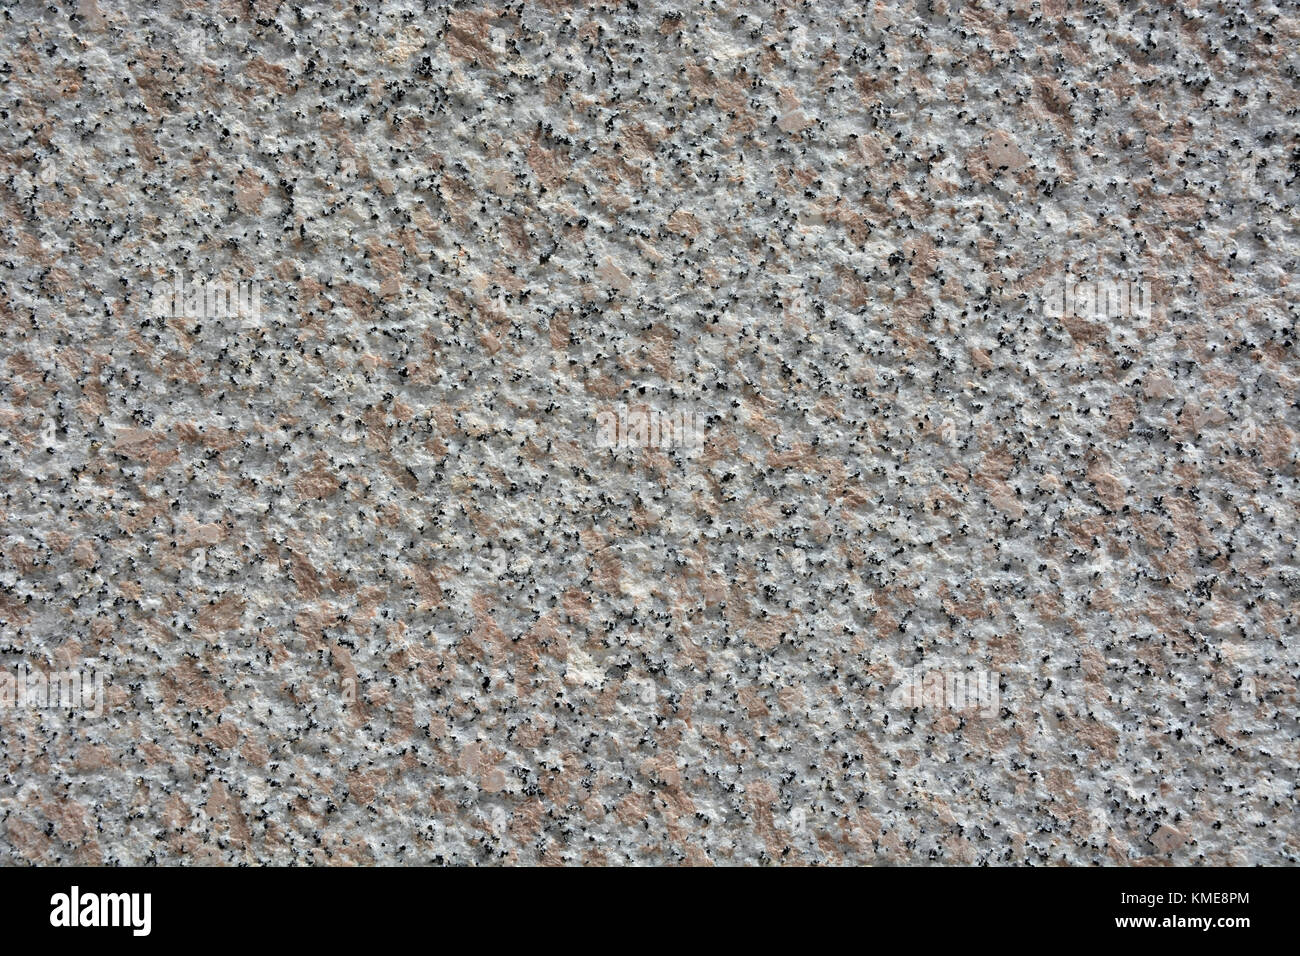 Seamless granite texture as a background Stock Photo